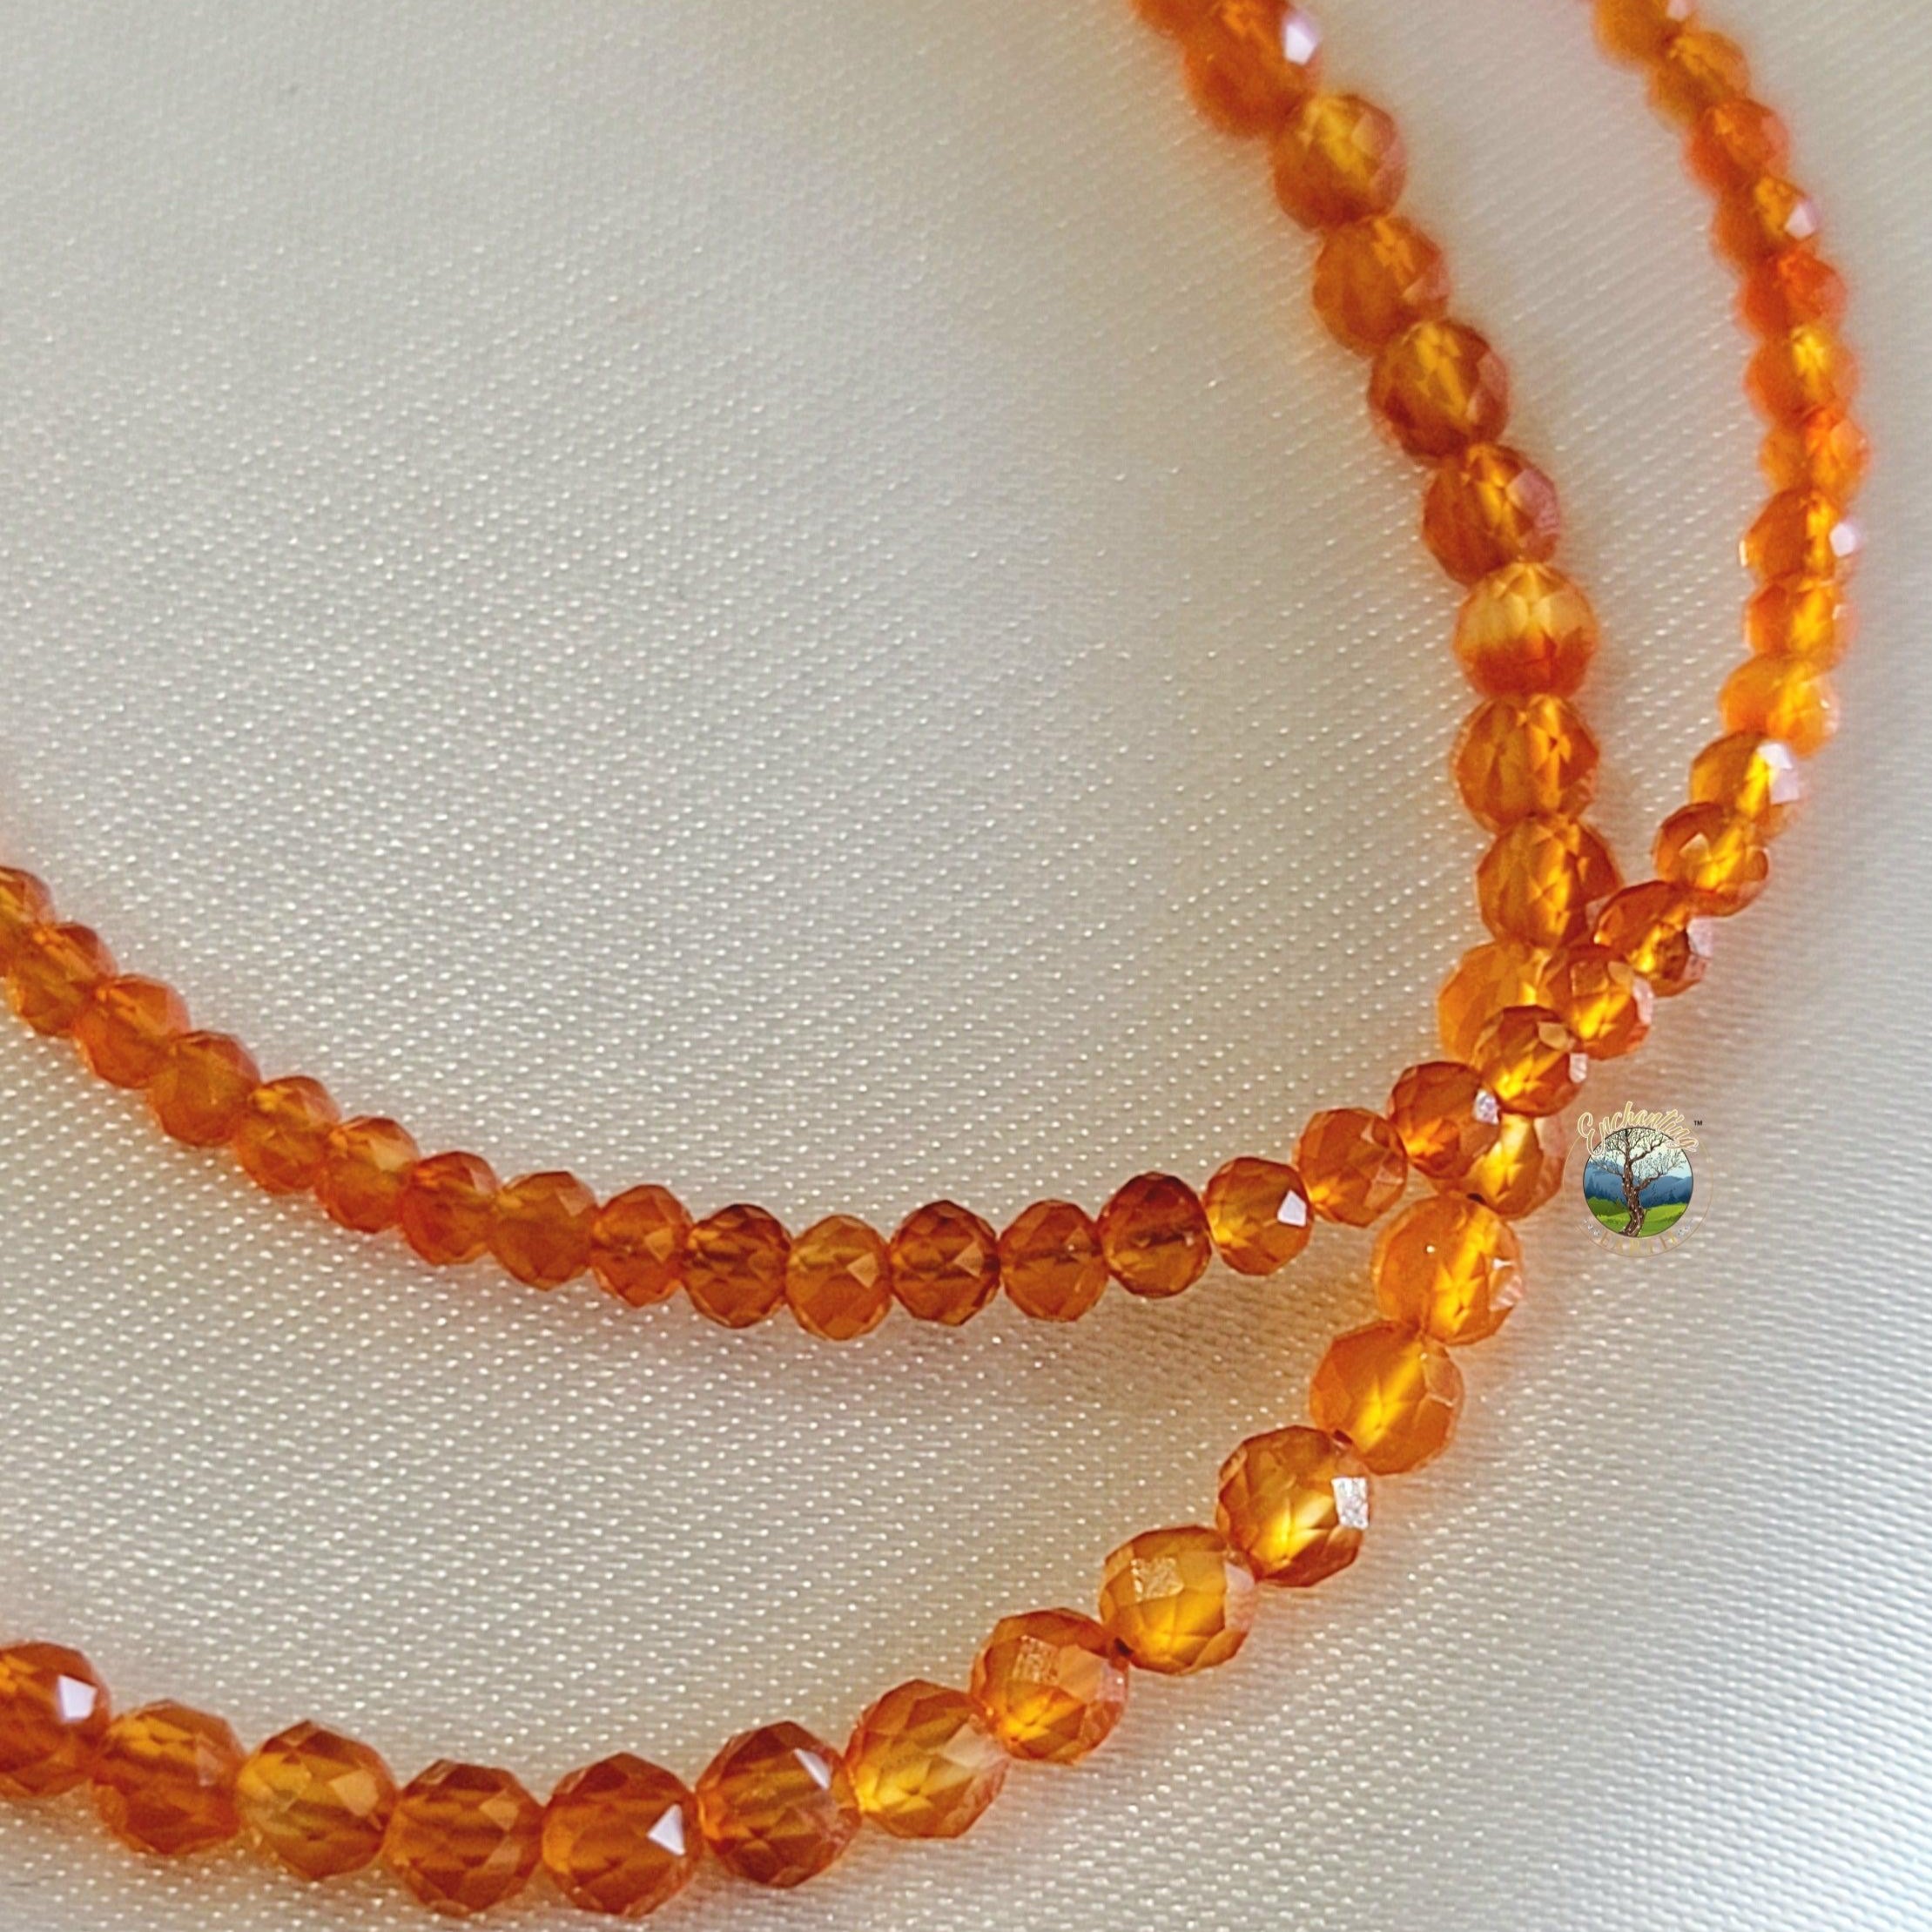 Carnelian Micro Faceted Bracelet for Embracing Your Inner Fire